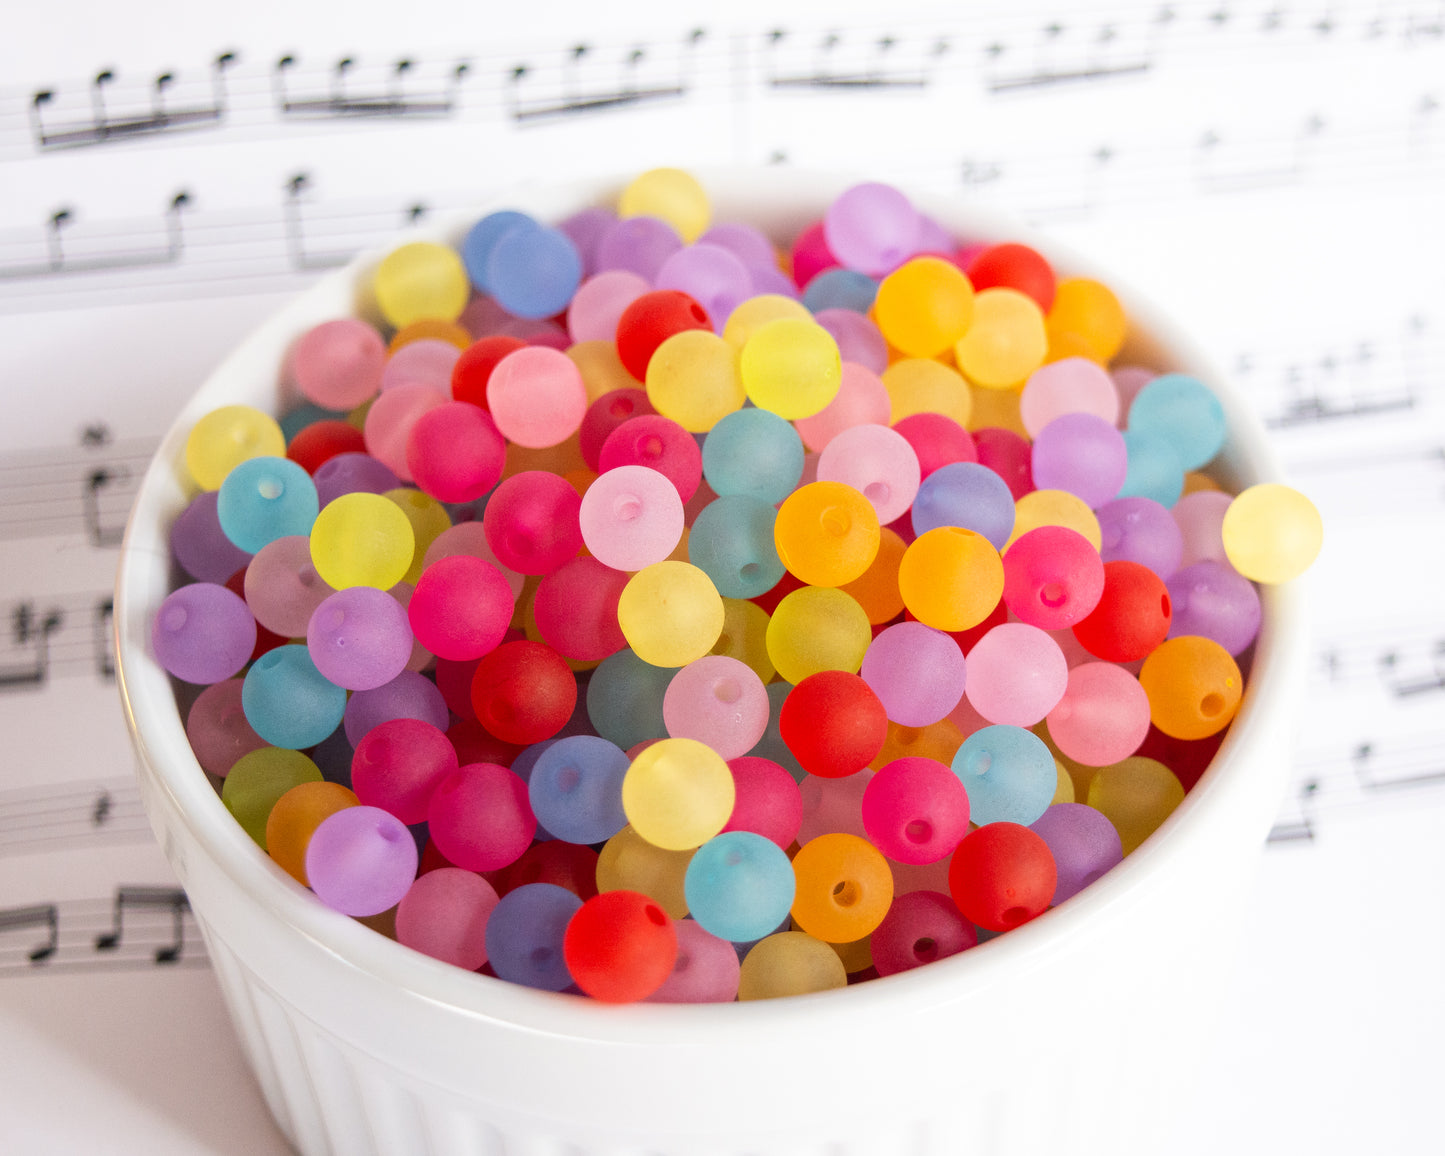 8mm Round Frosted Acrylic Beads in Pretty Colors, Lightweight For Jewelry and Crafts